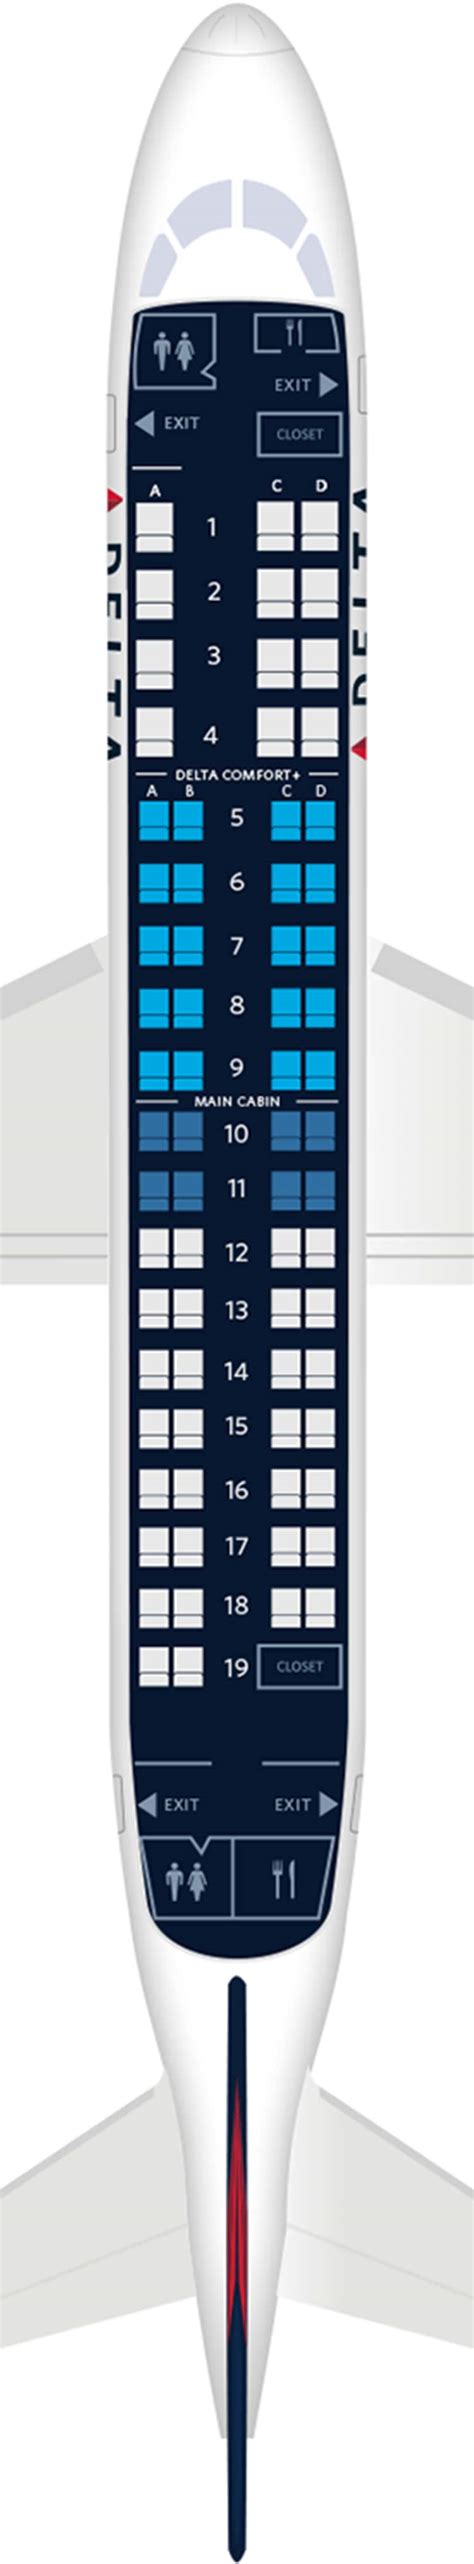 Embraer 175 seating chart. Your guide to Air Canada seat maps and fleet information, use this before you book or take a flight. ... Cheap Flights; Comparison Charts. Short-haul Economy Class; Short-haul First/Business Class; Long-haul Economy Class; Premium Economy Class; Long-haul Business Class; Long-haul First Class; ... Embraer E-175 : 38-39: 20: Recliner: On-Demand ... 